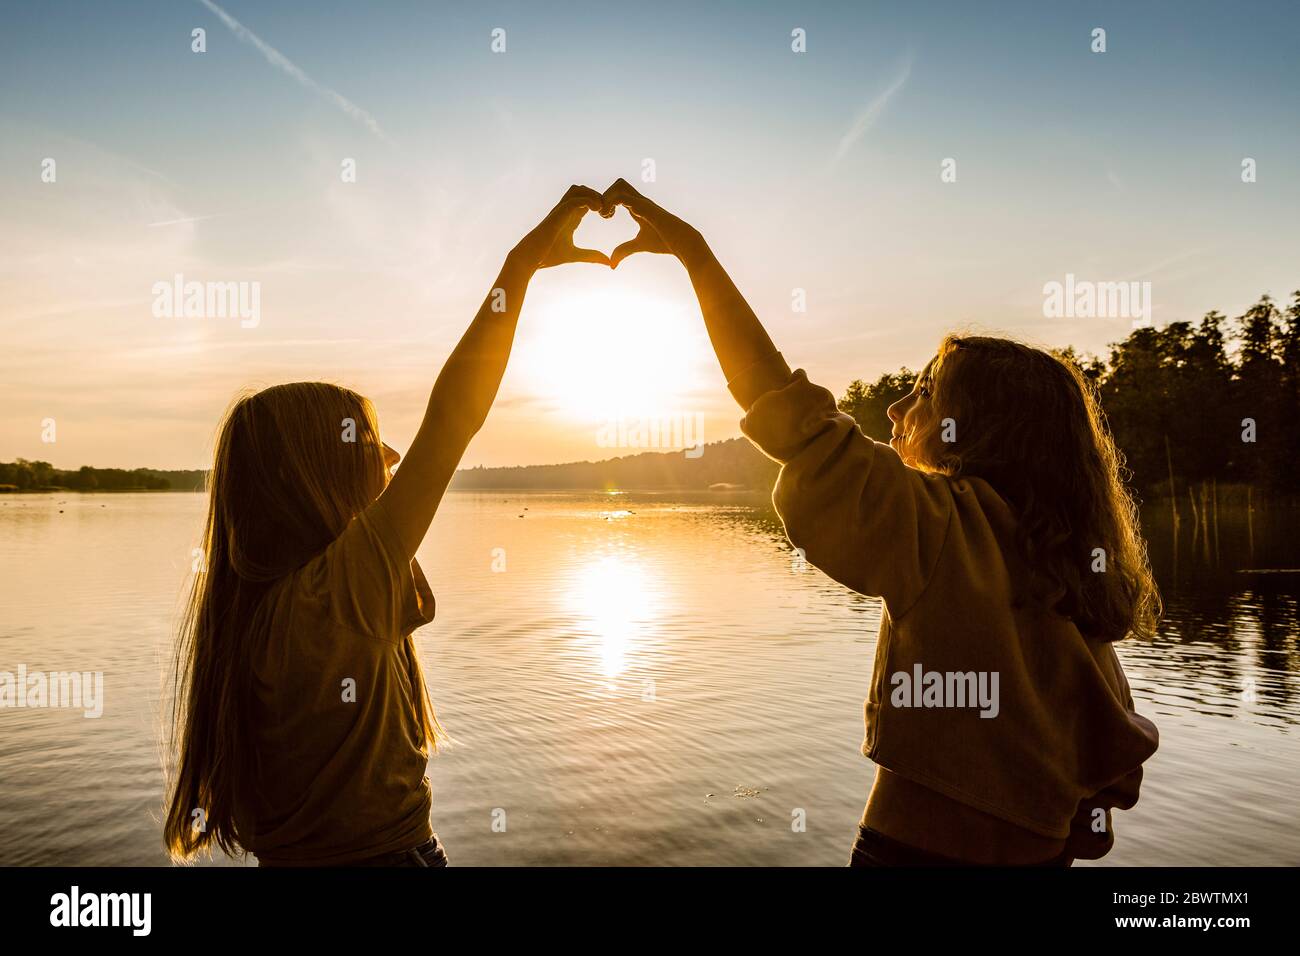 Friends making heart shape with hands against lake during sunset Stock Photo